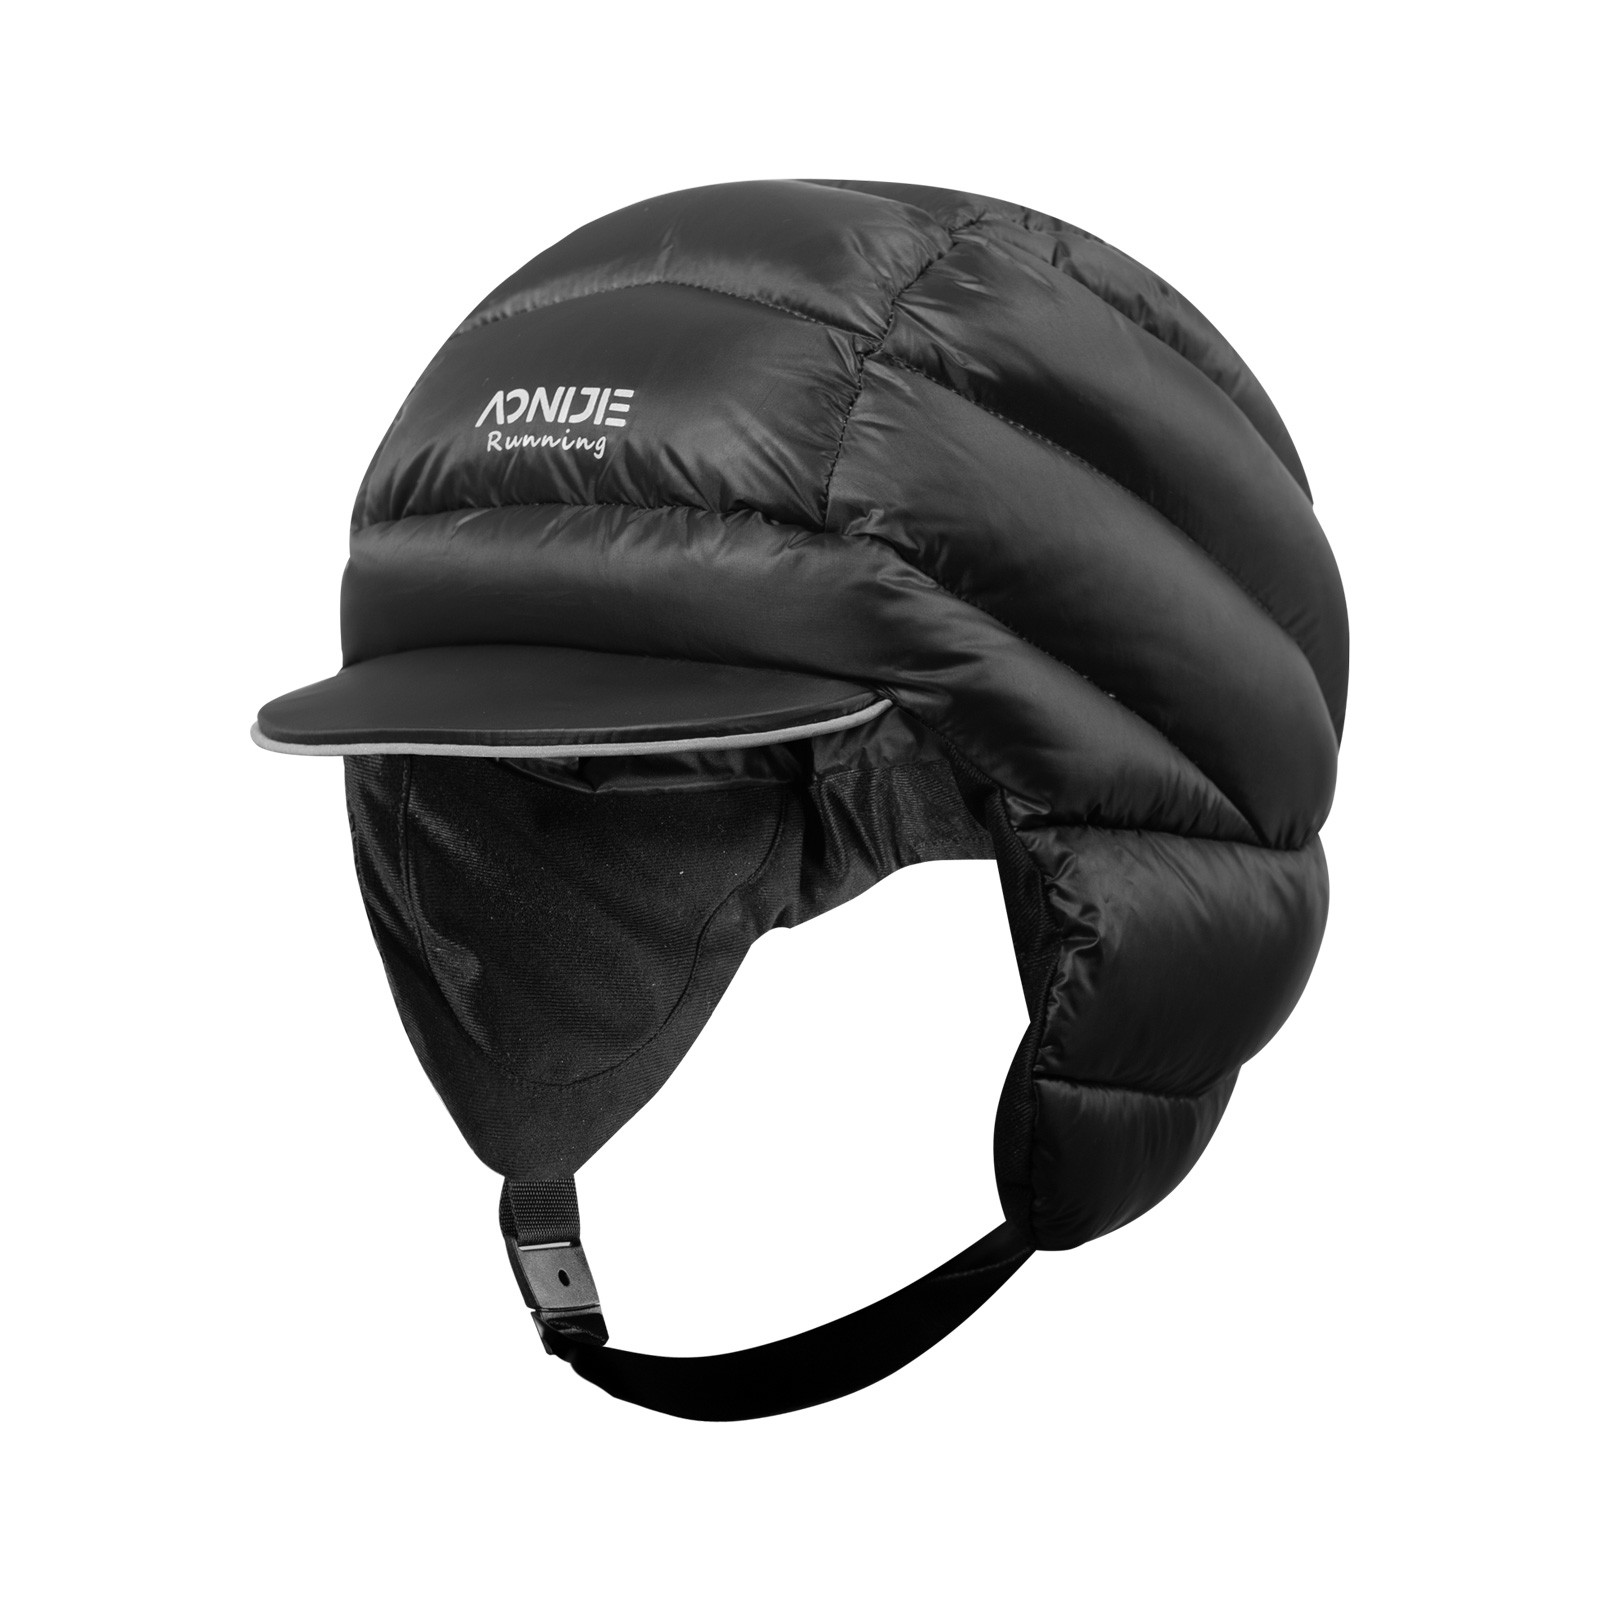 AONIJIE M-35 Outdoor Windproof Down Hat Black Grey Lightweight Warm Ear Protection Caps for Sports Running Riding Hiking Mountain Climbing